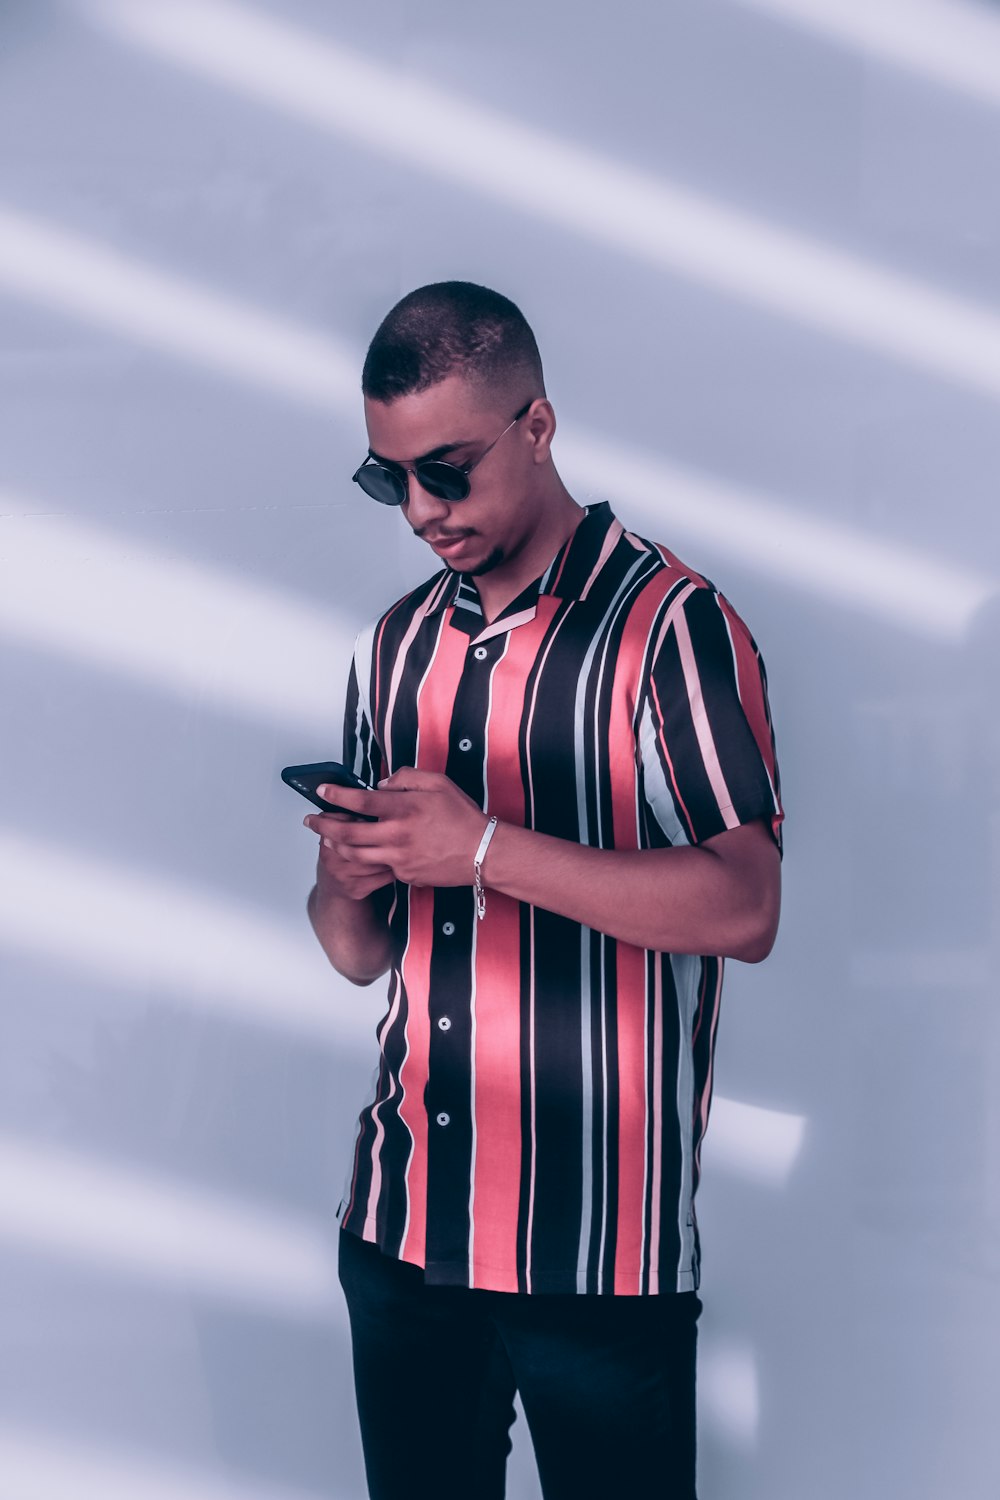 a man in a striped shirt using a cell phone